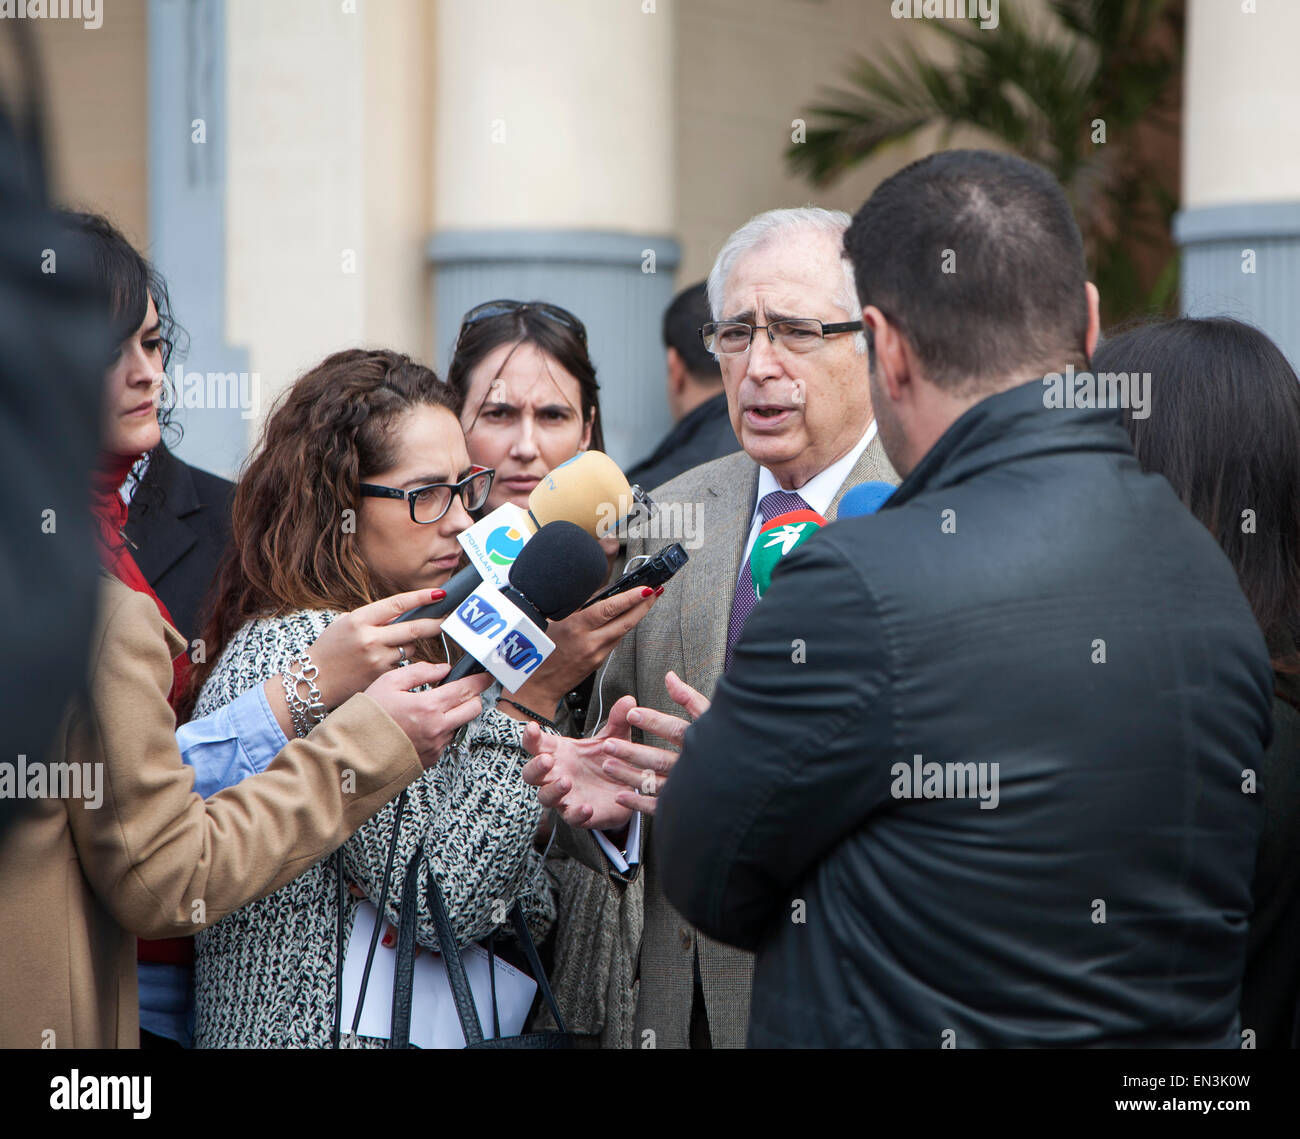 Press interview Imbroda Ortiz president of the autonomous city state of Melilla, a Spanish exclave in north Africa, Stock Photo